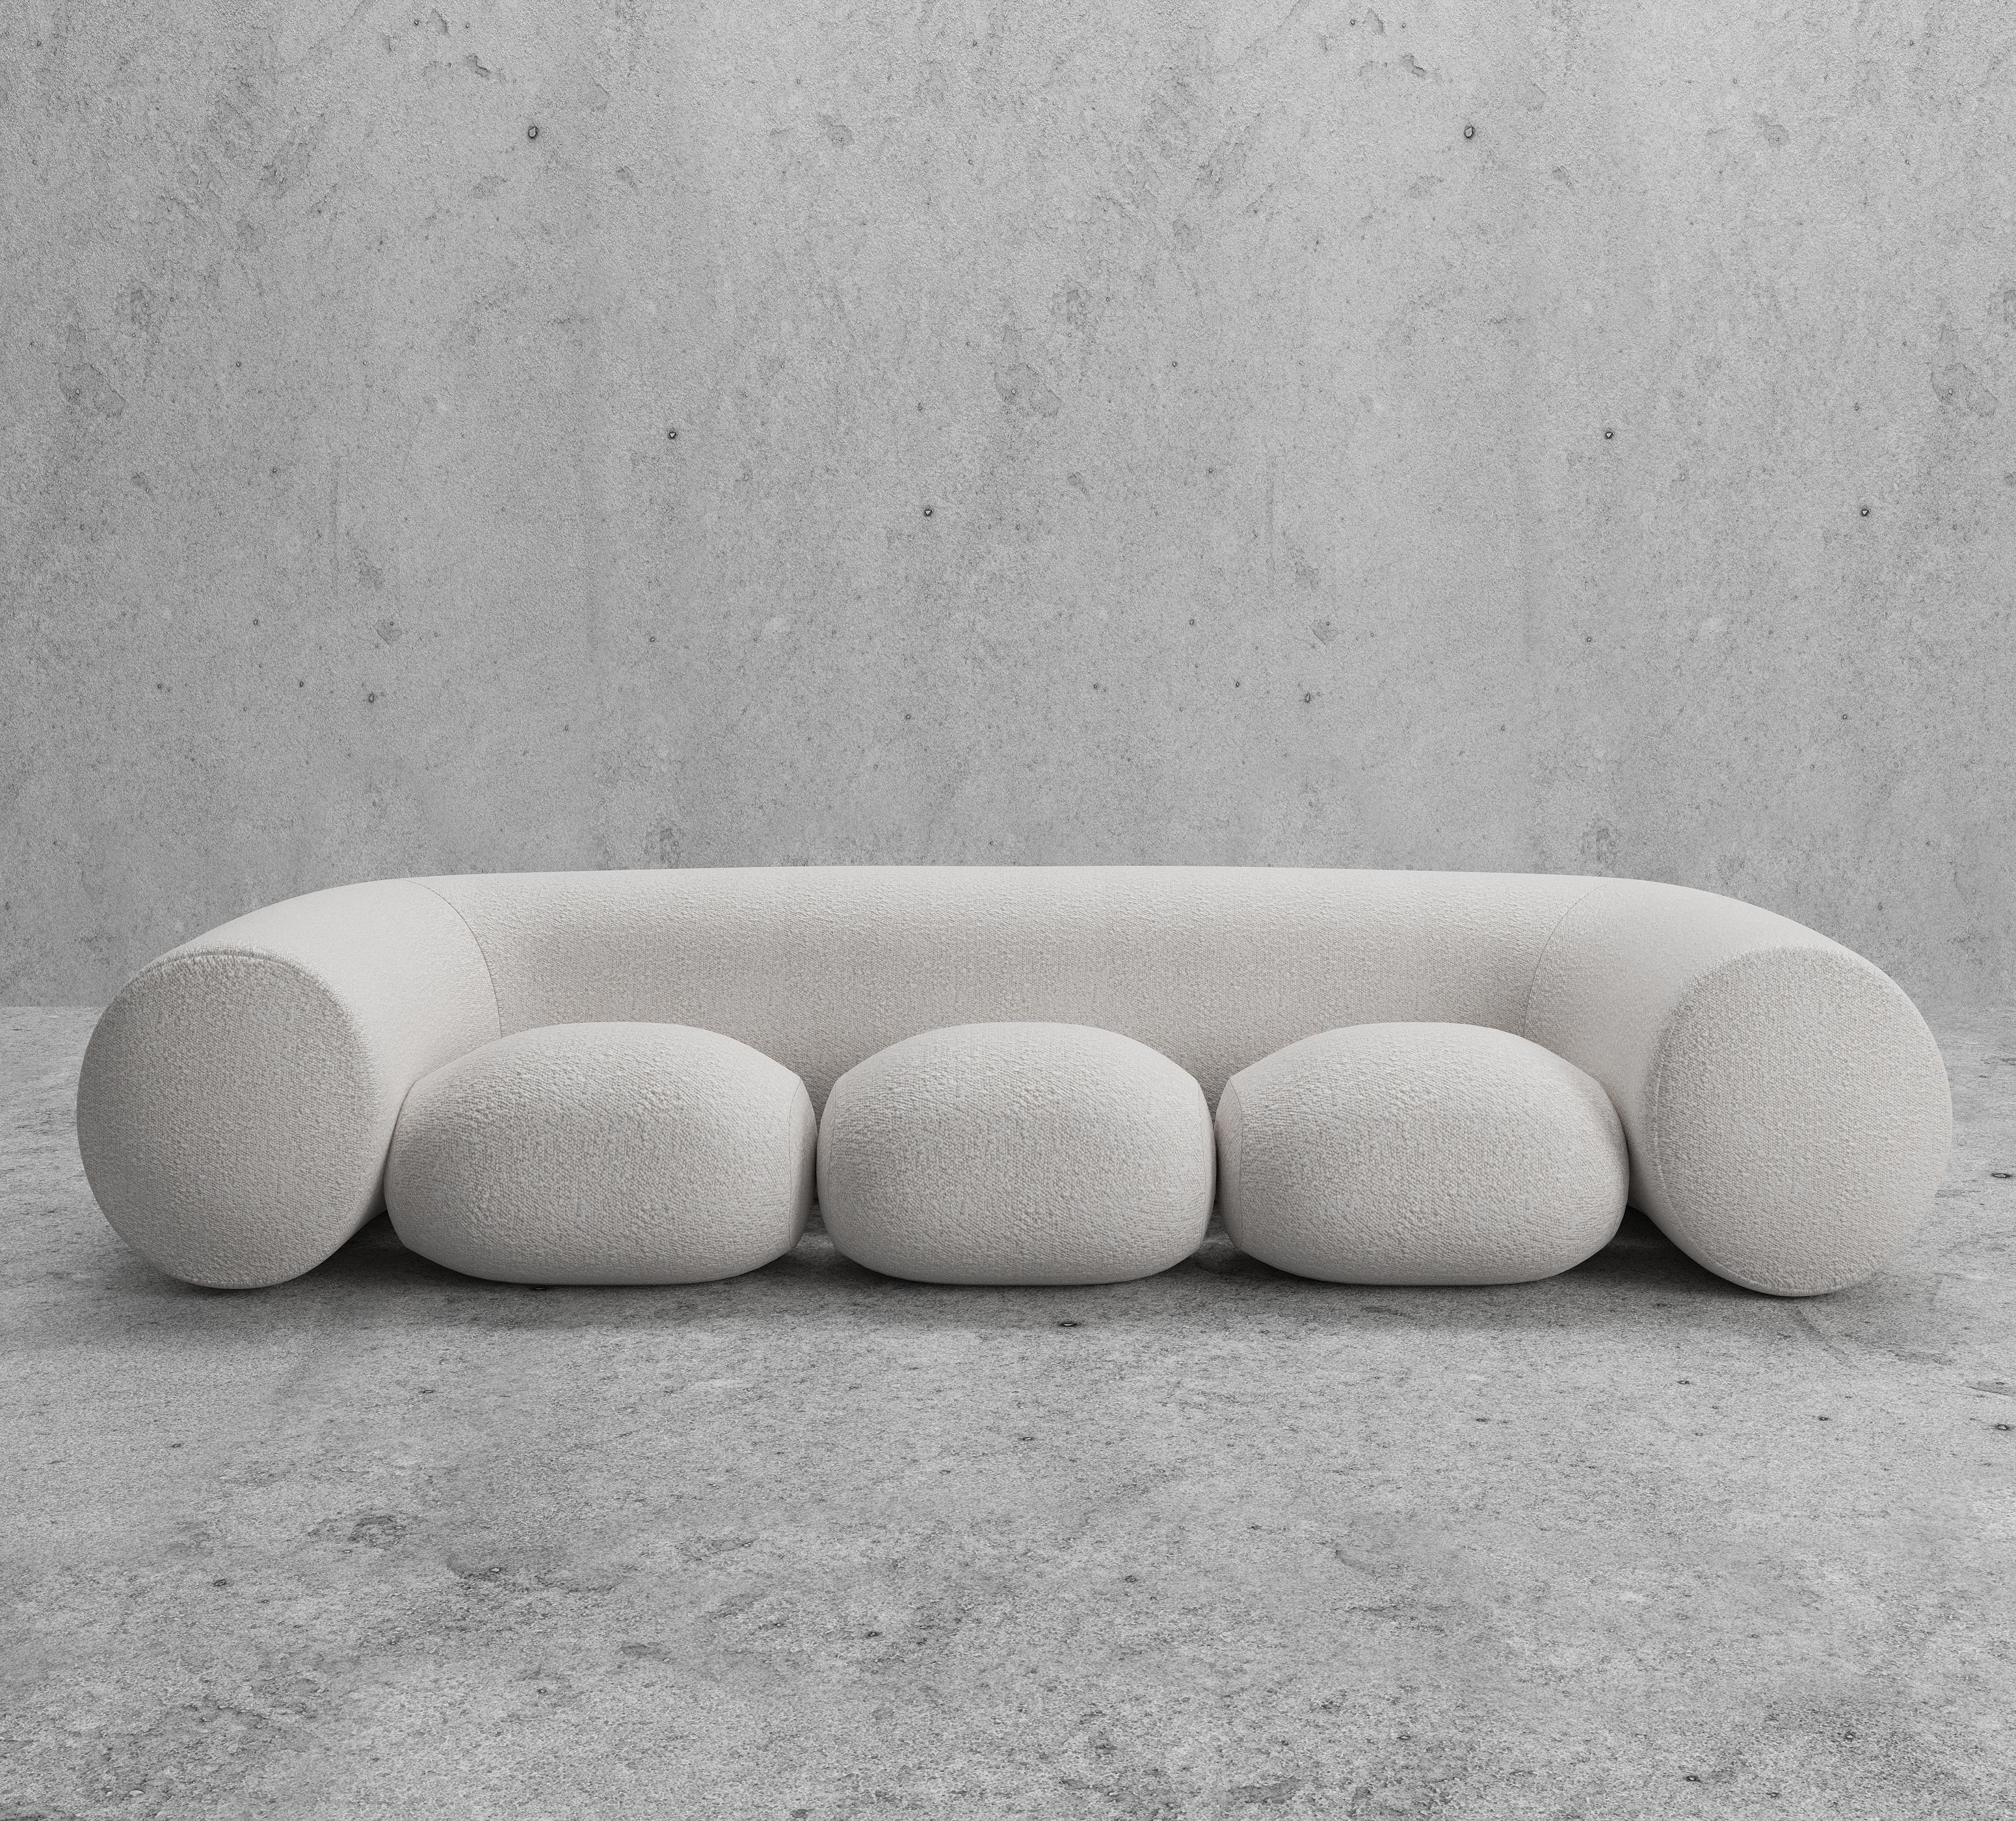 The Pammy sofa from the Bubbly collection by Koki Design House is like sitting on a cloud. Not a simple sofa but a new take on a relaxing experience in style adding playfulness to your space. Upholstery in bouclé fabric. 

The internal structure of